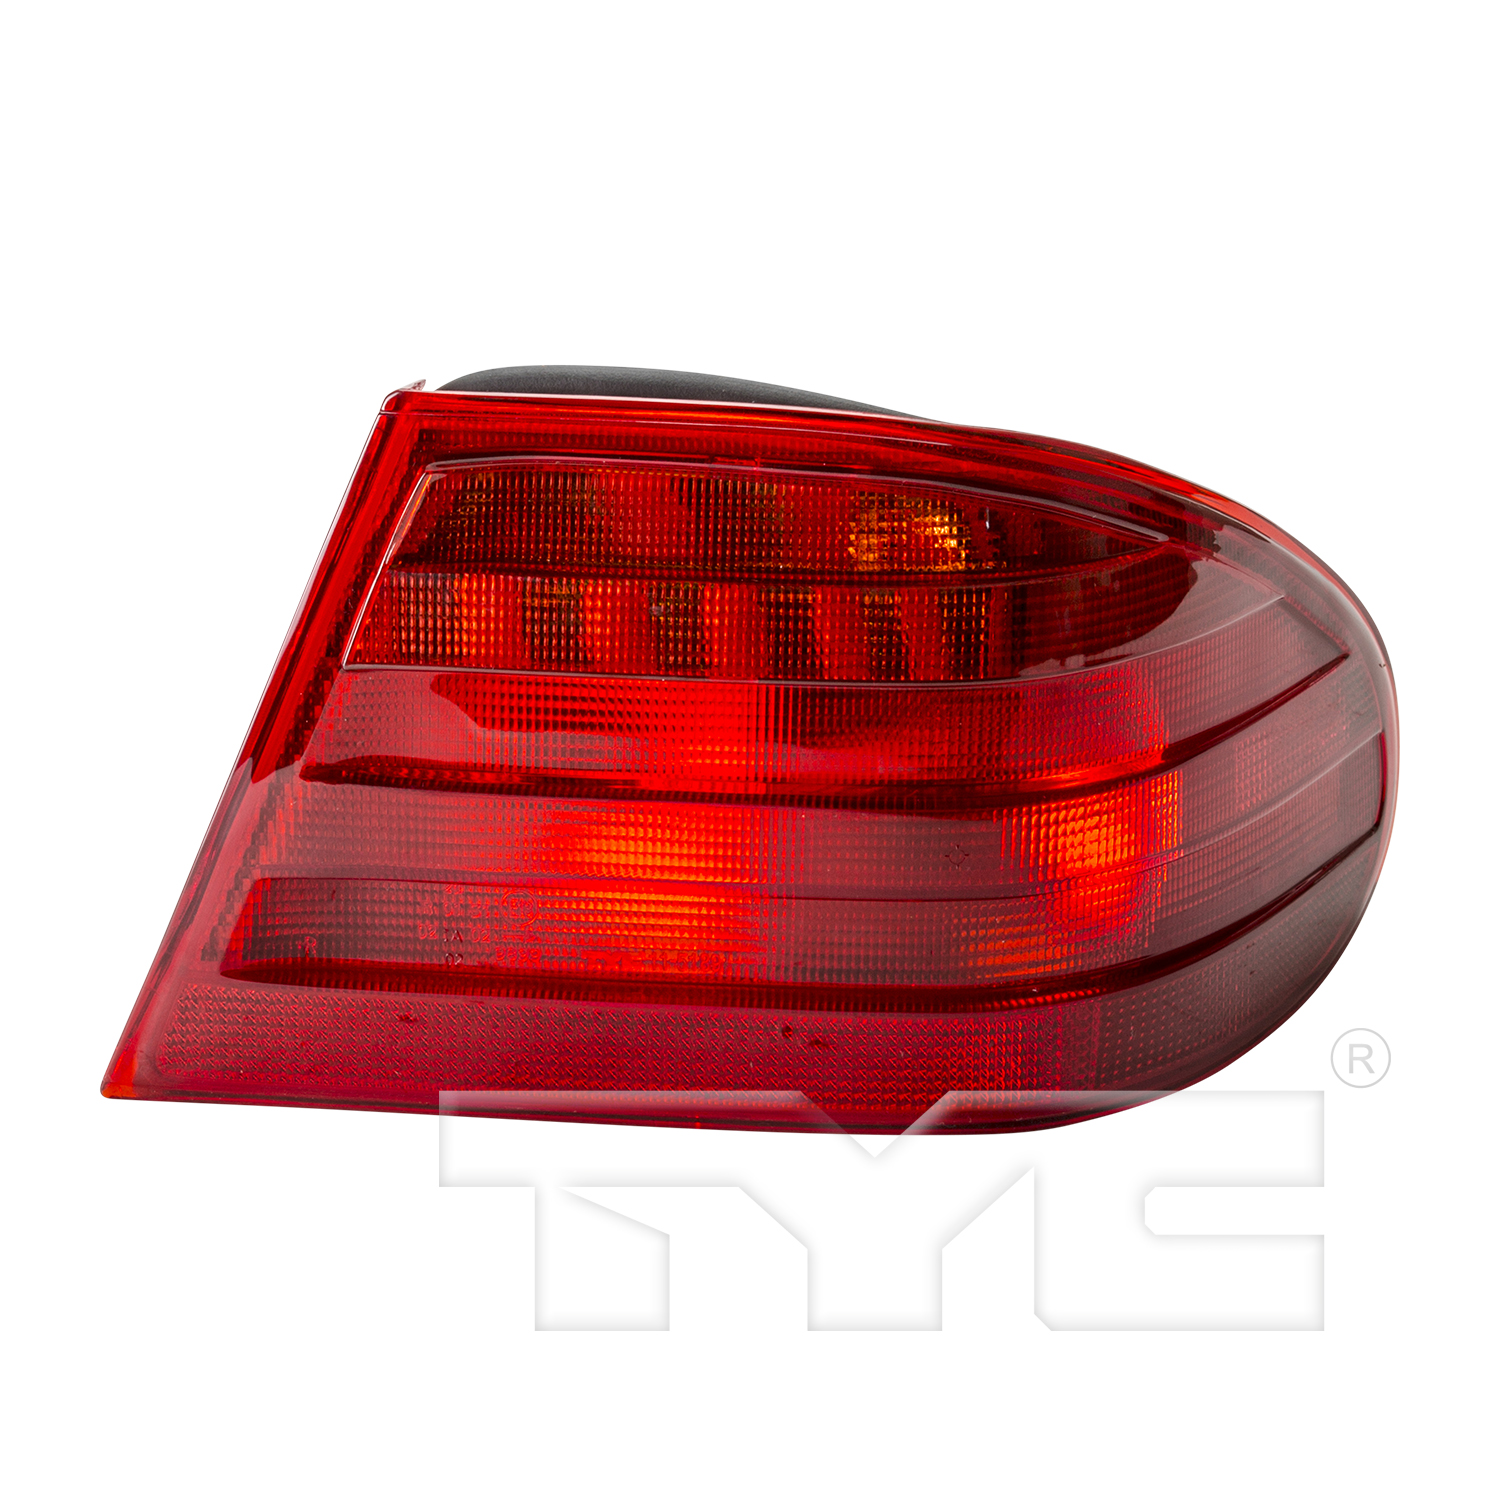 Aftermarket TAILLIGHTS for MERCEDES-BENZ - E300, E300,95-99,RT Taillamp assy outer